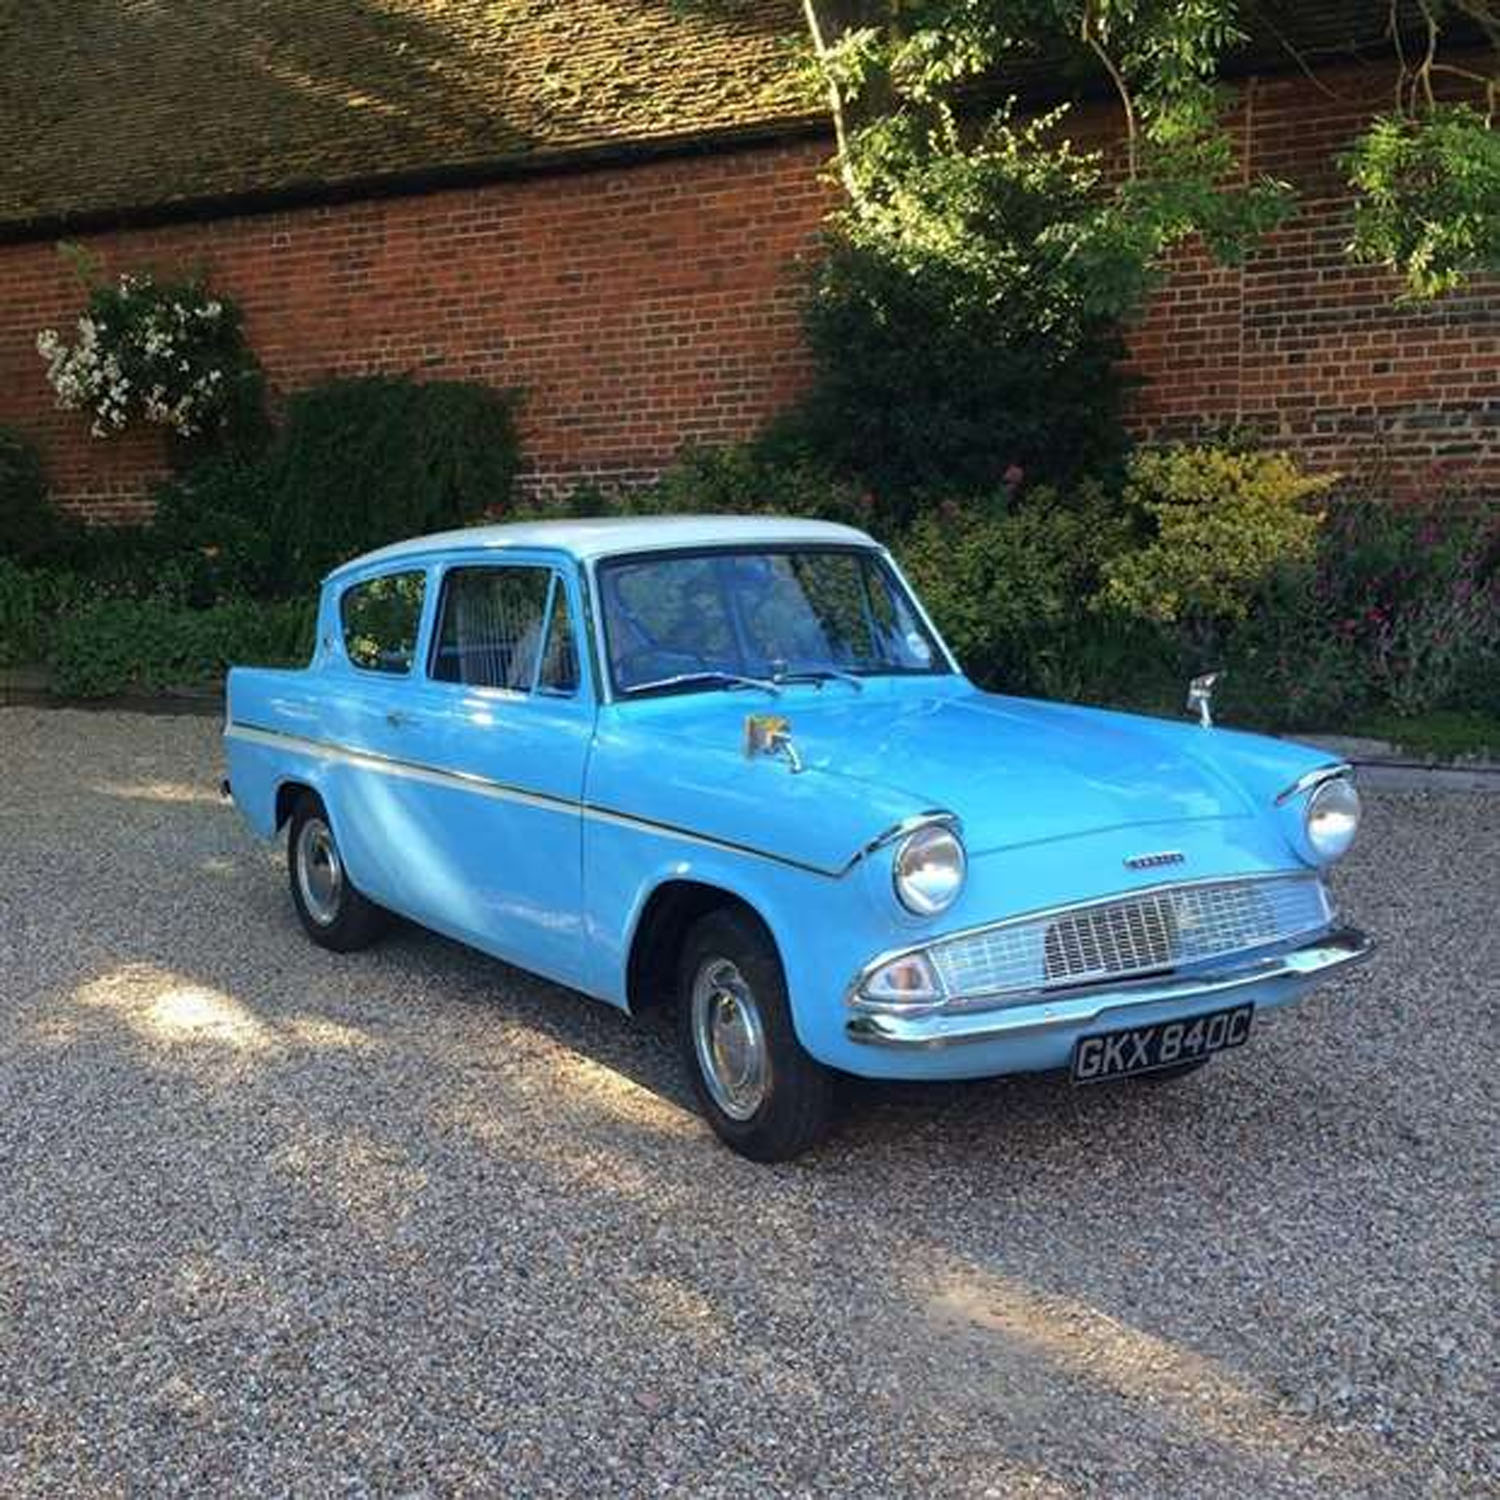 operatie Netto Hobart Heartless Thief Steals Harry Potter Replica Ford Anglia